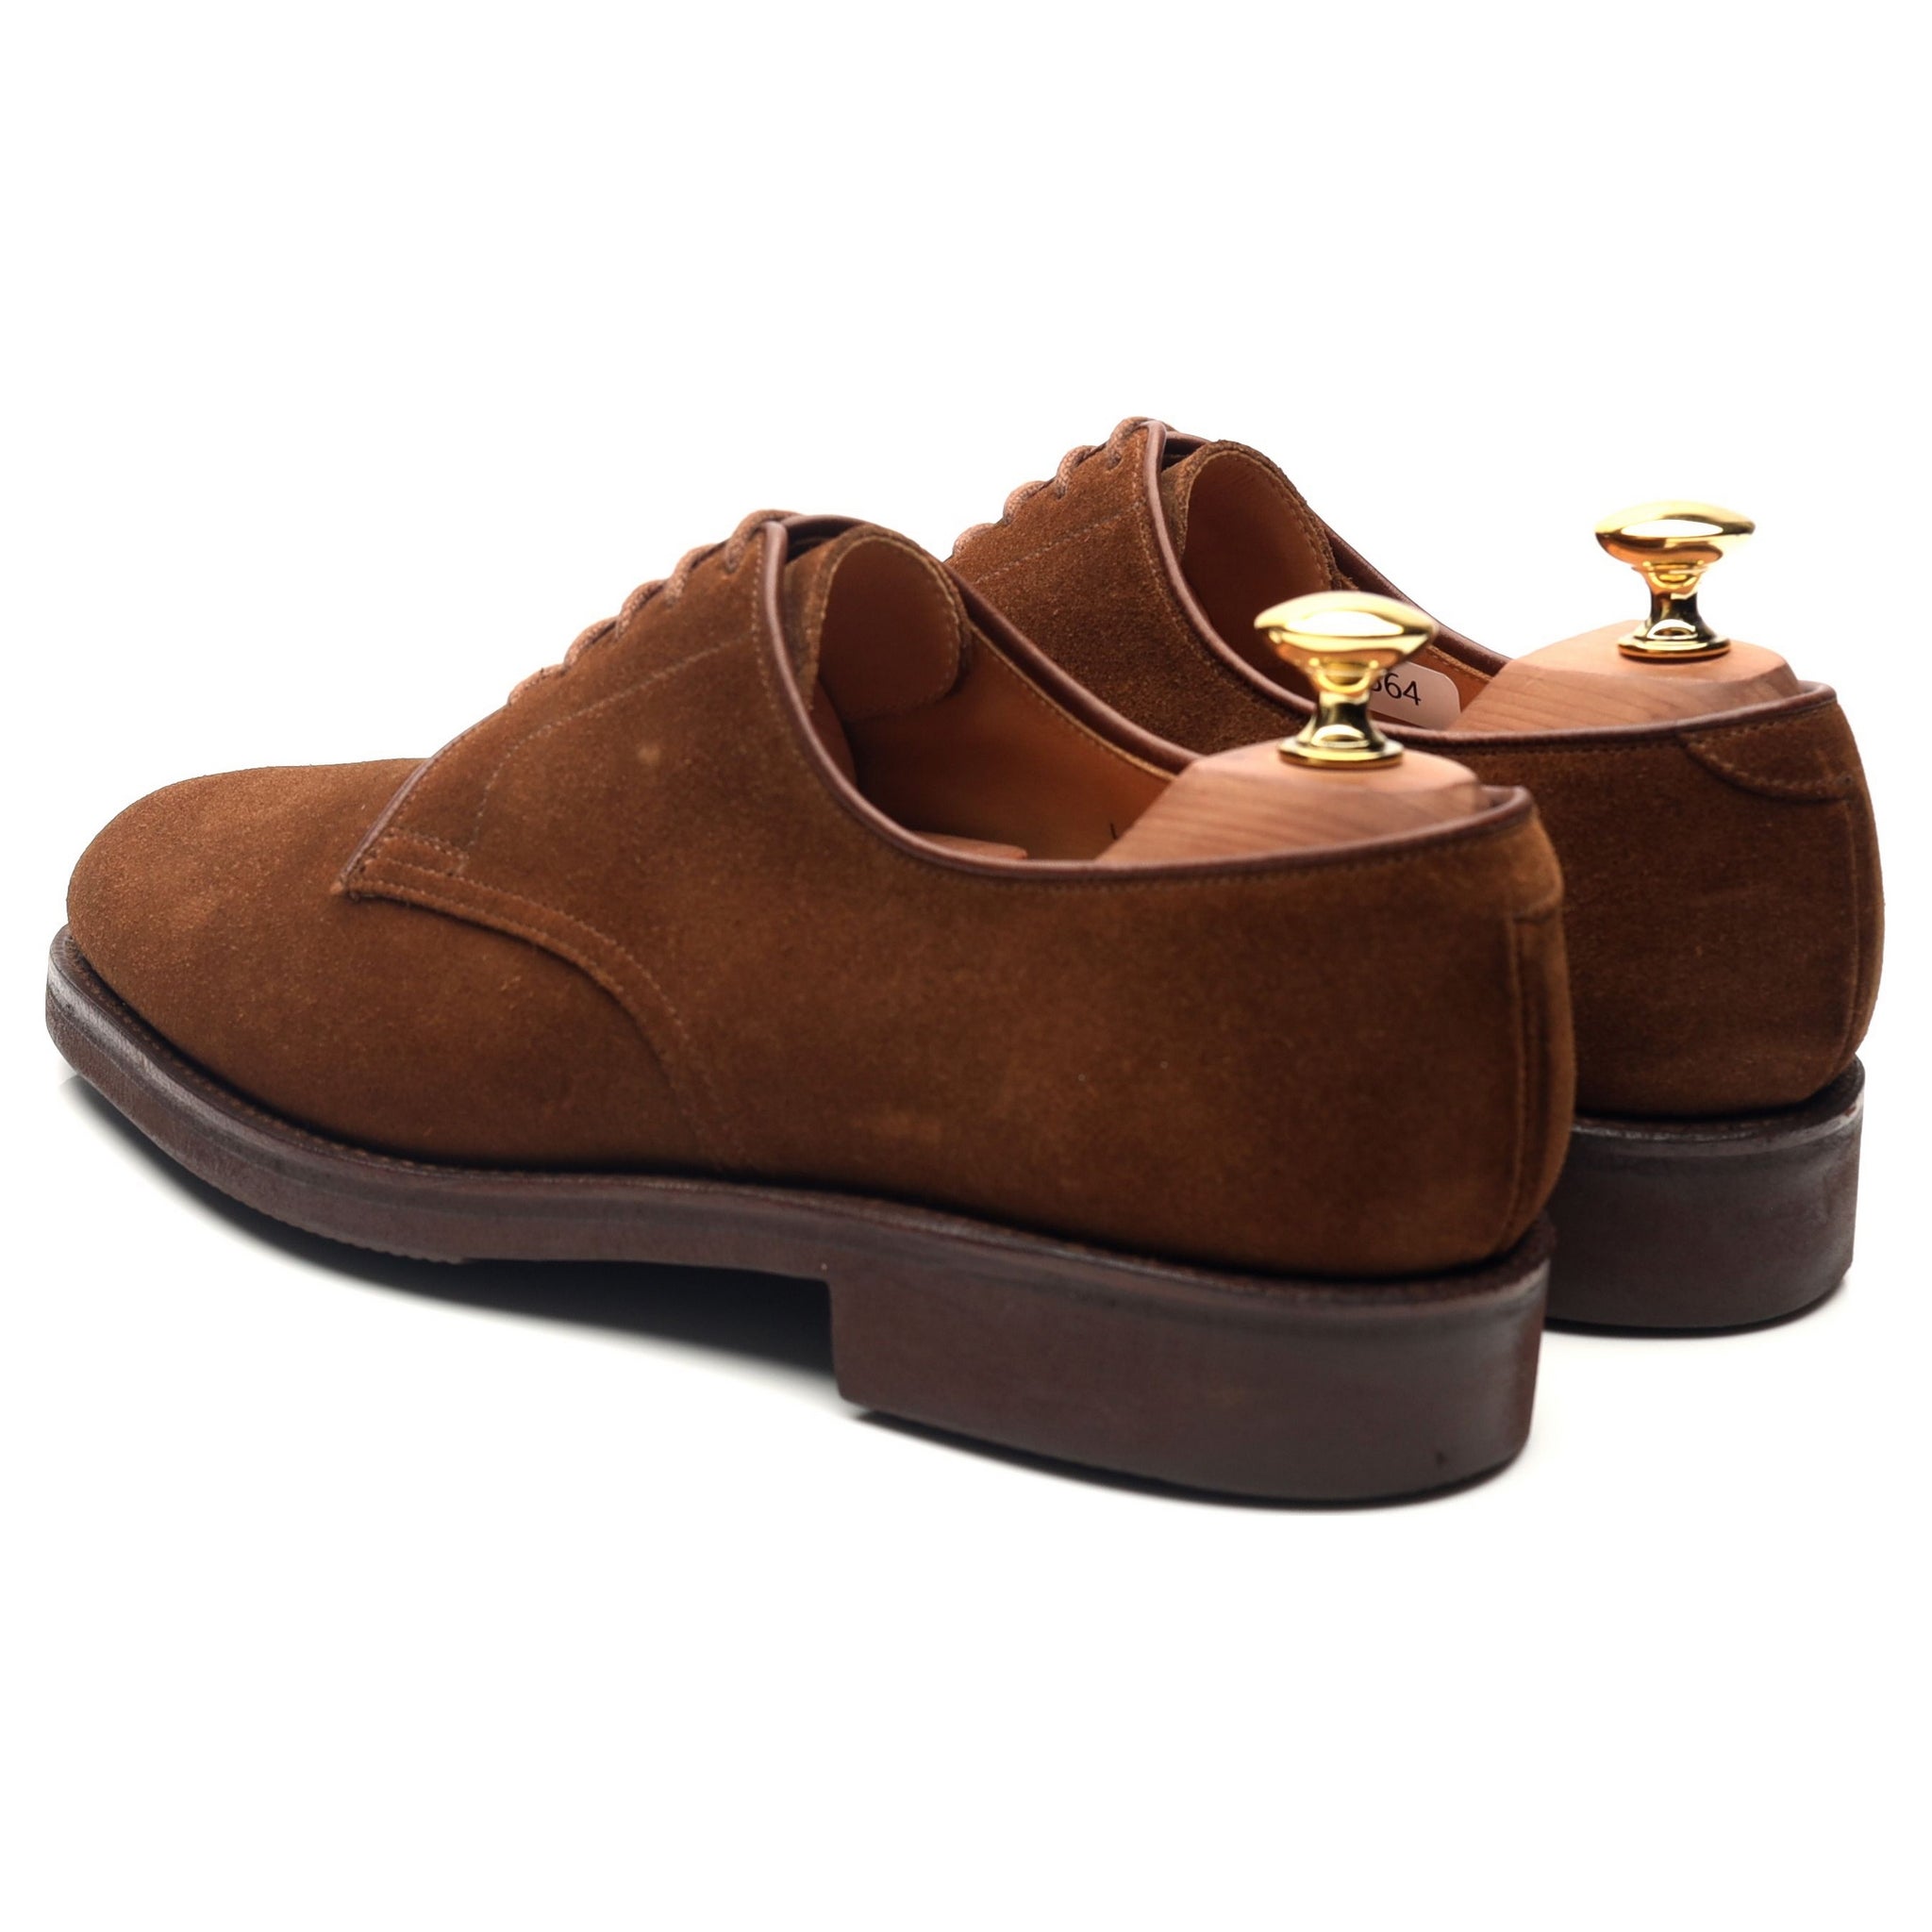 'Latimer' Tan Brown Suede Derby UK 6 G - Abbot's Shoes